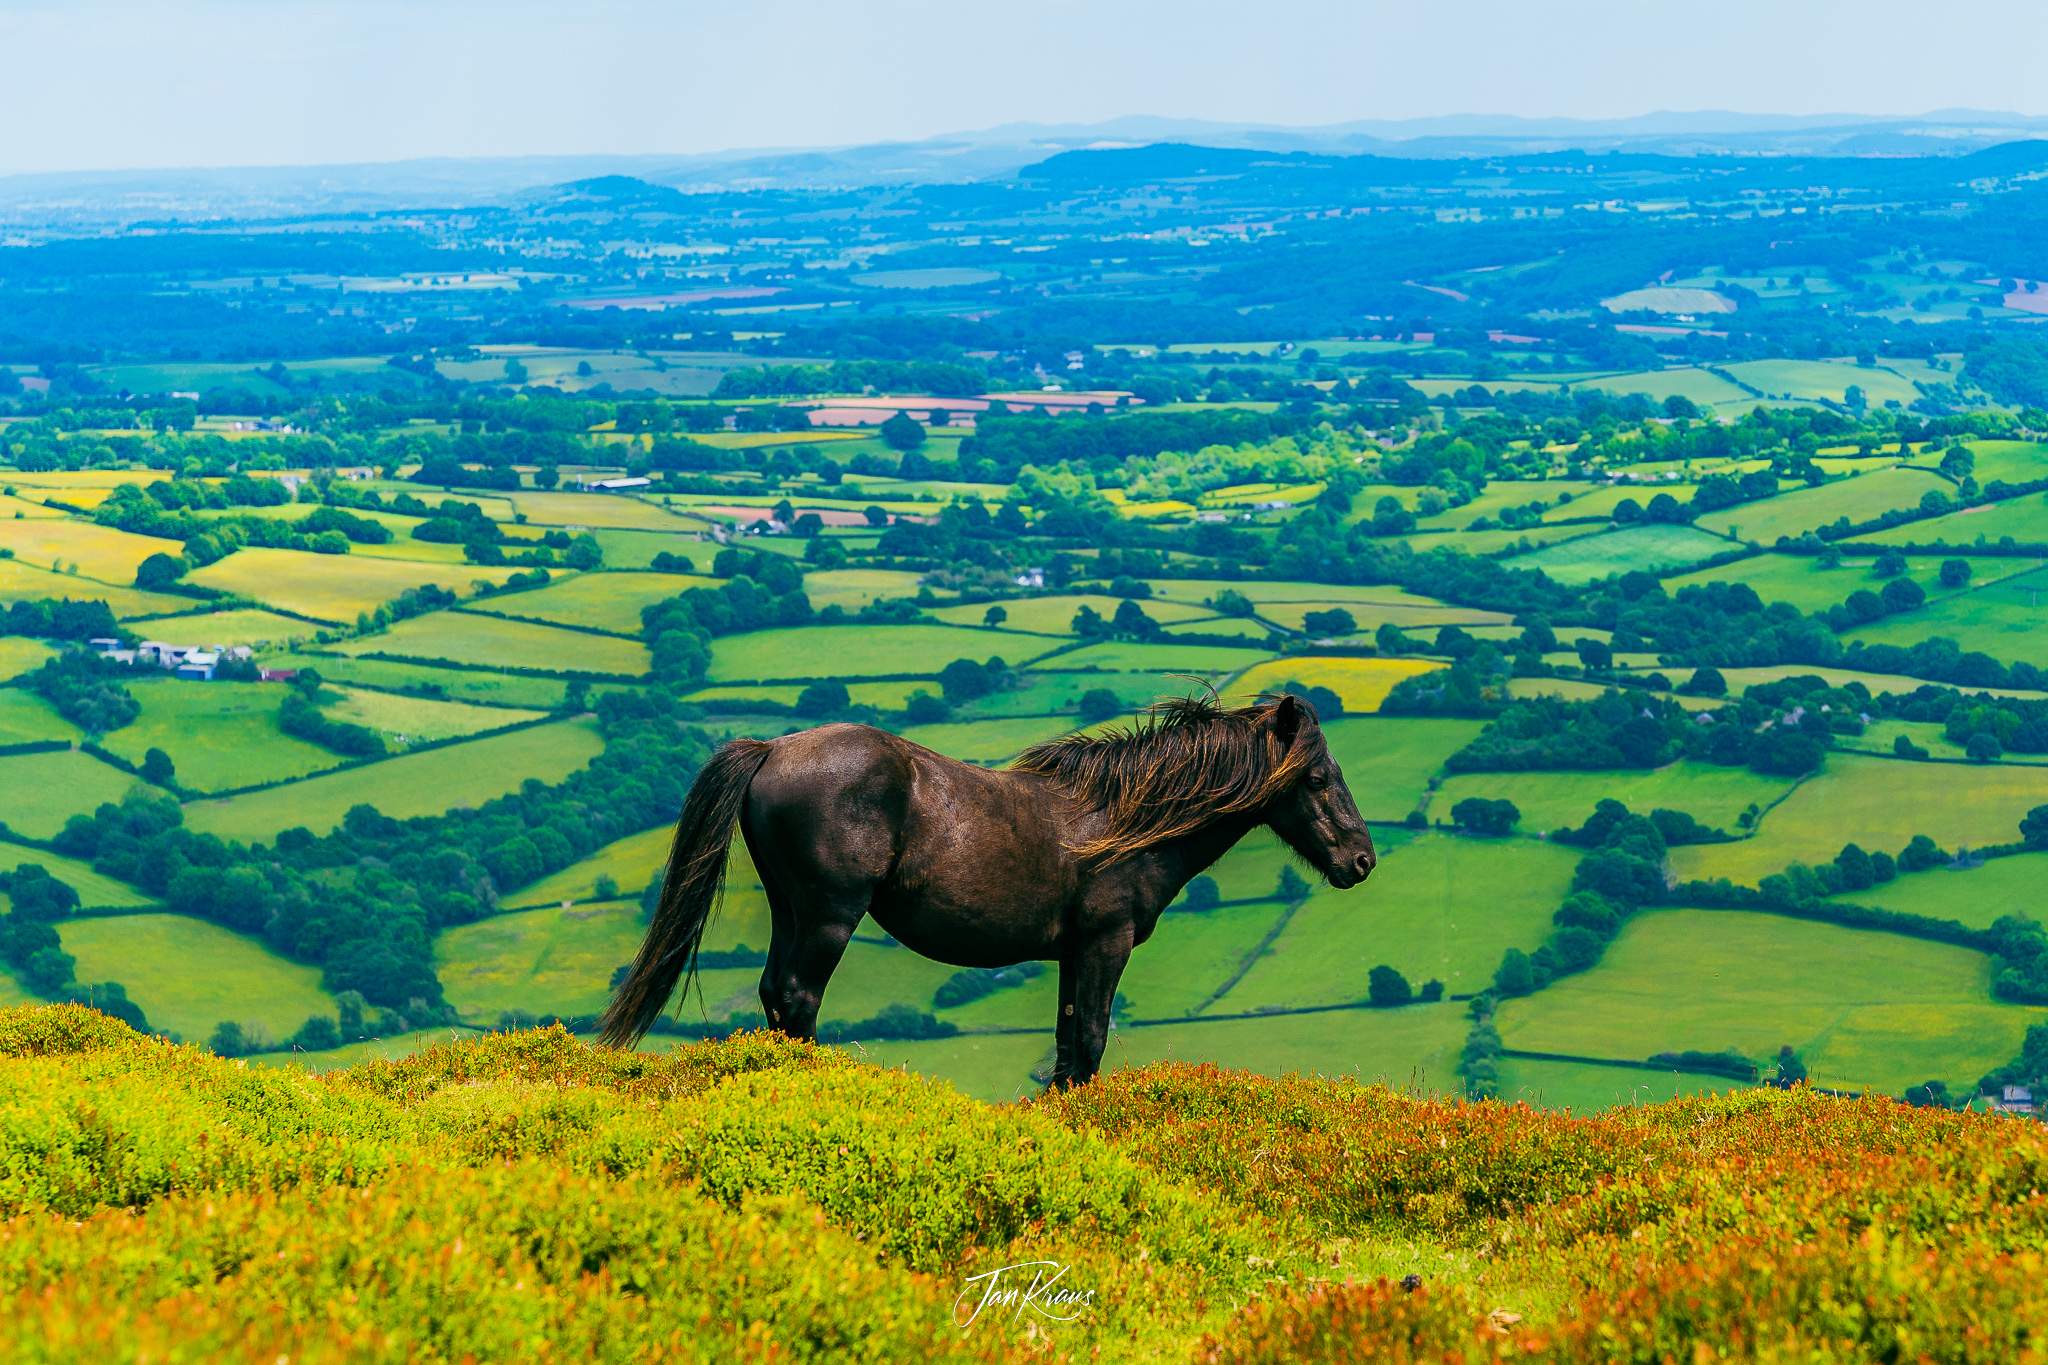 Wild horse watching me at the Beacons Way, Hatterrall Hill ridge, Wales, UK